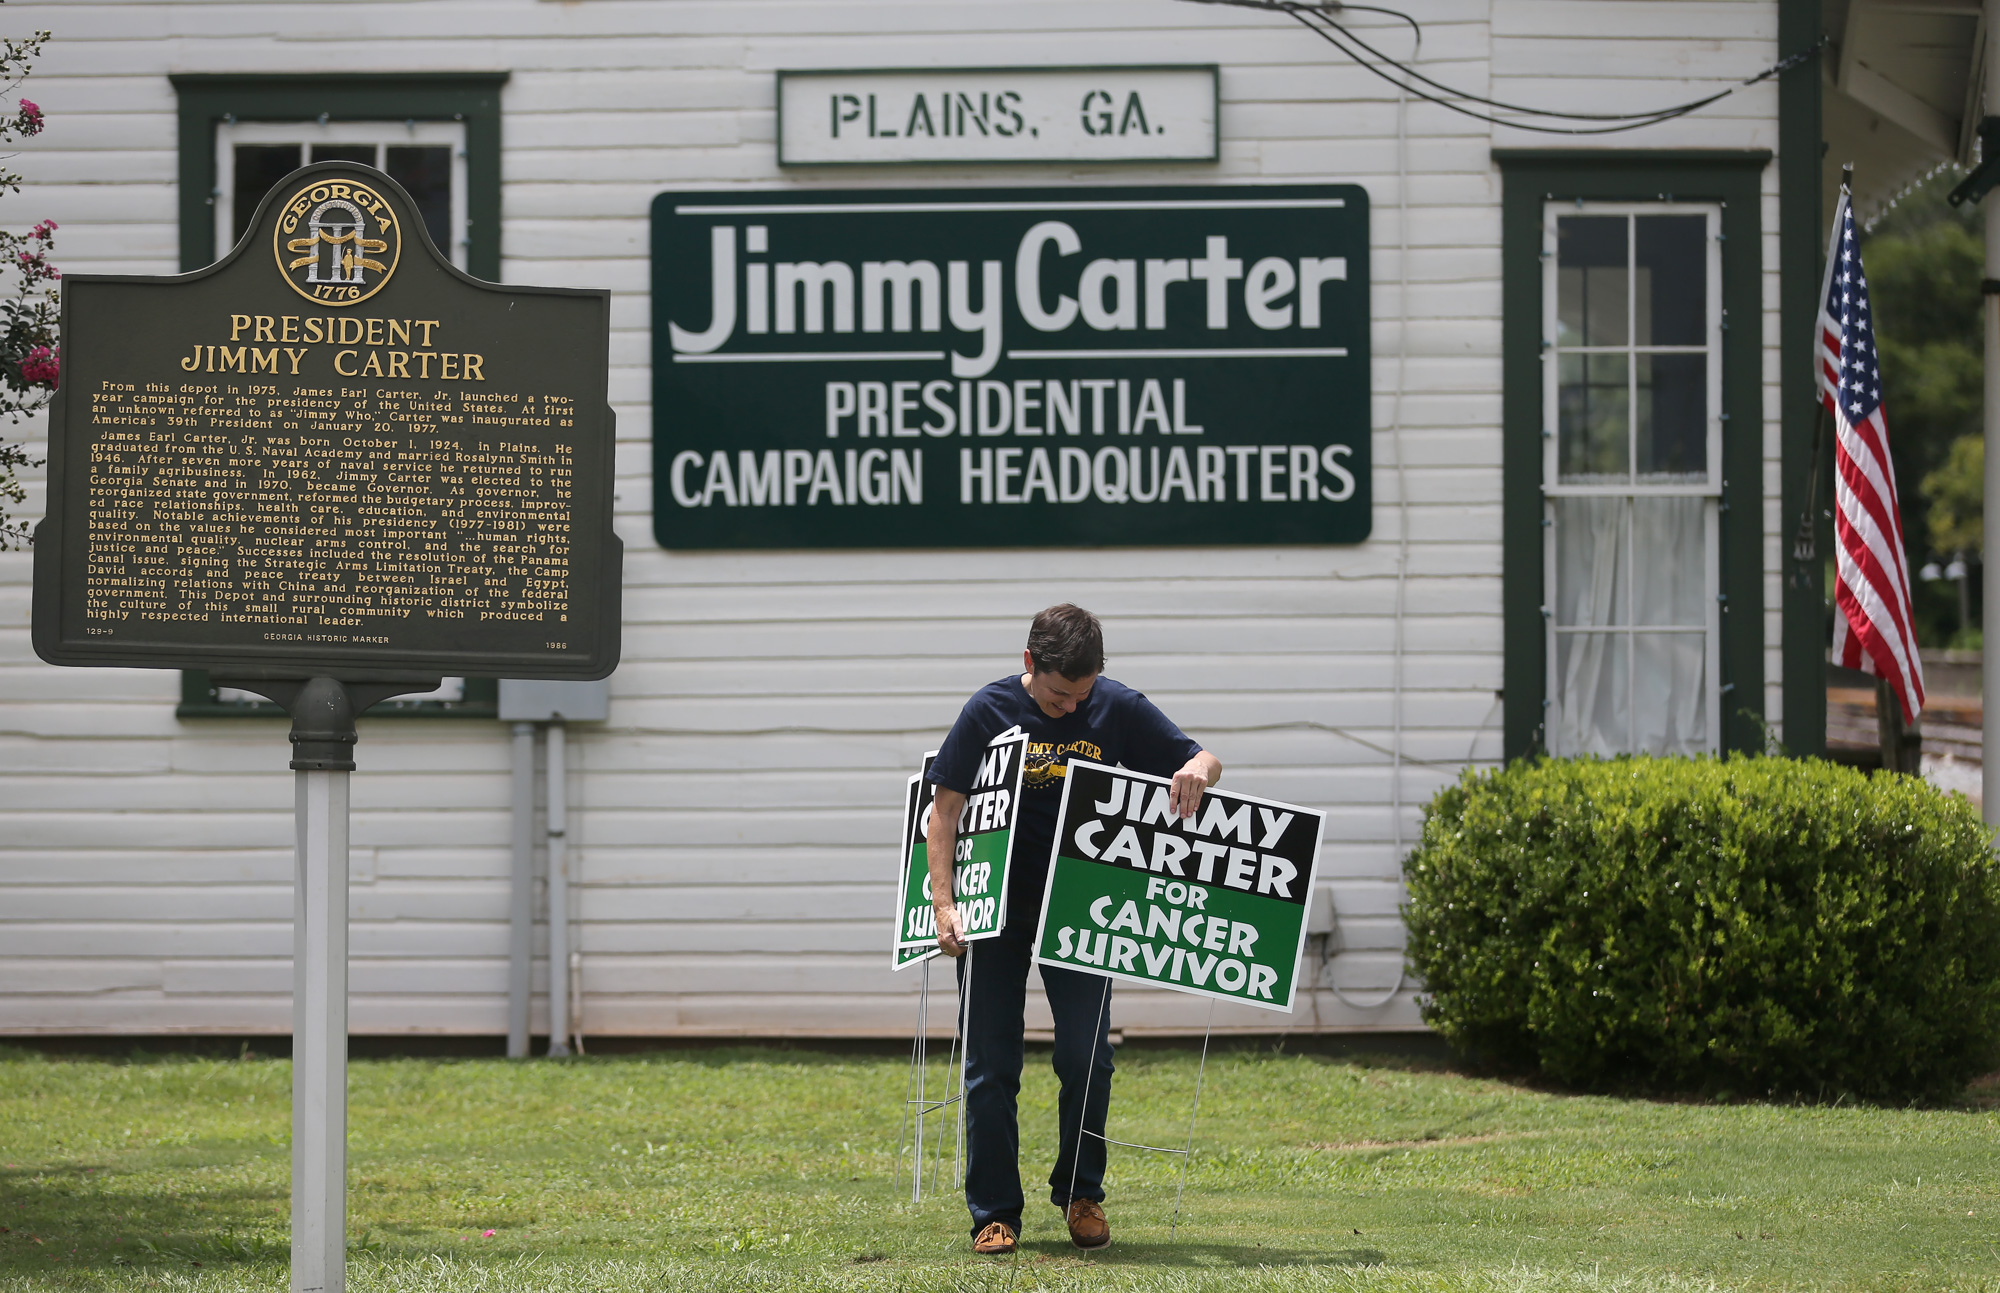 Jill Stuckey places "Jimmy Carter for Cancer Survivor" signs in downtown Plains in advance of the President's return to his hometown. Stuckey printed 500 of the signs after seeing one in a Mike Luckovich cartoon drawn just after Carter announced that he had cancer.